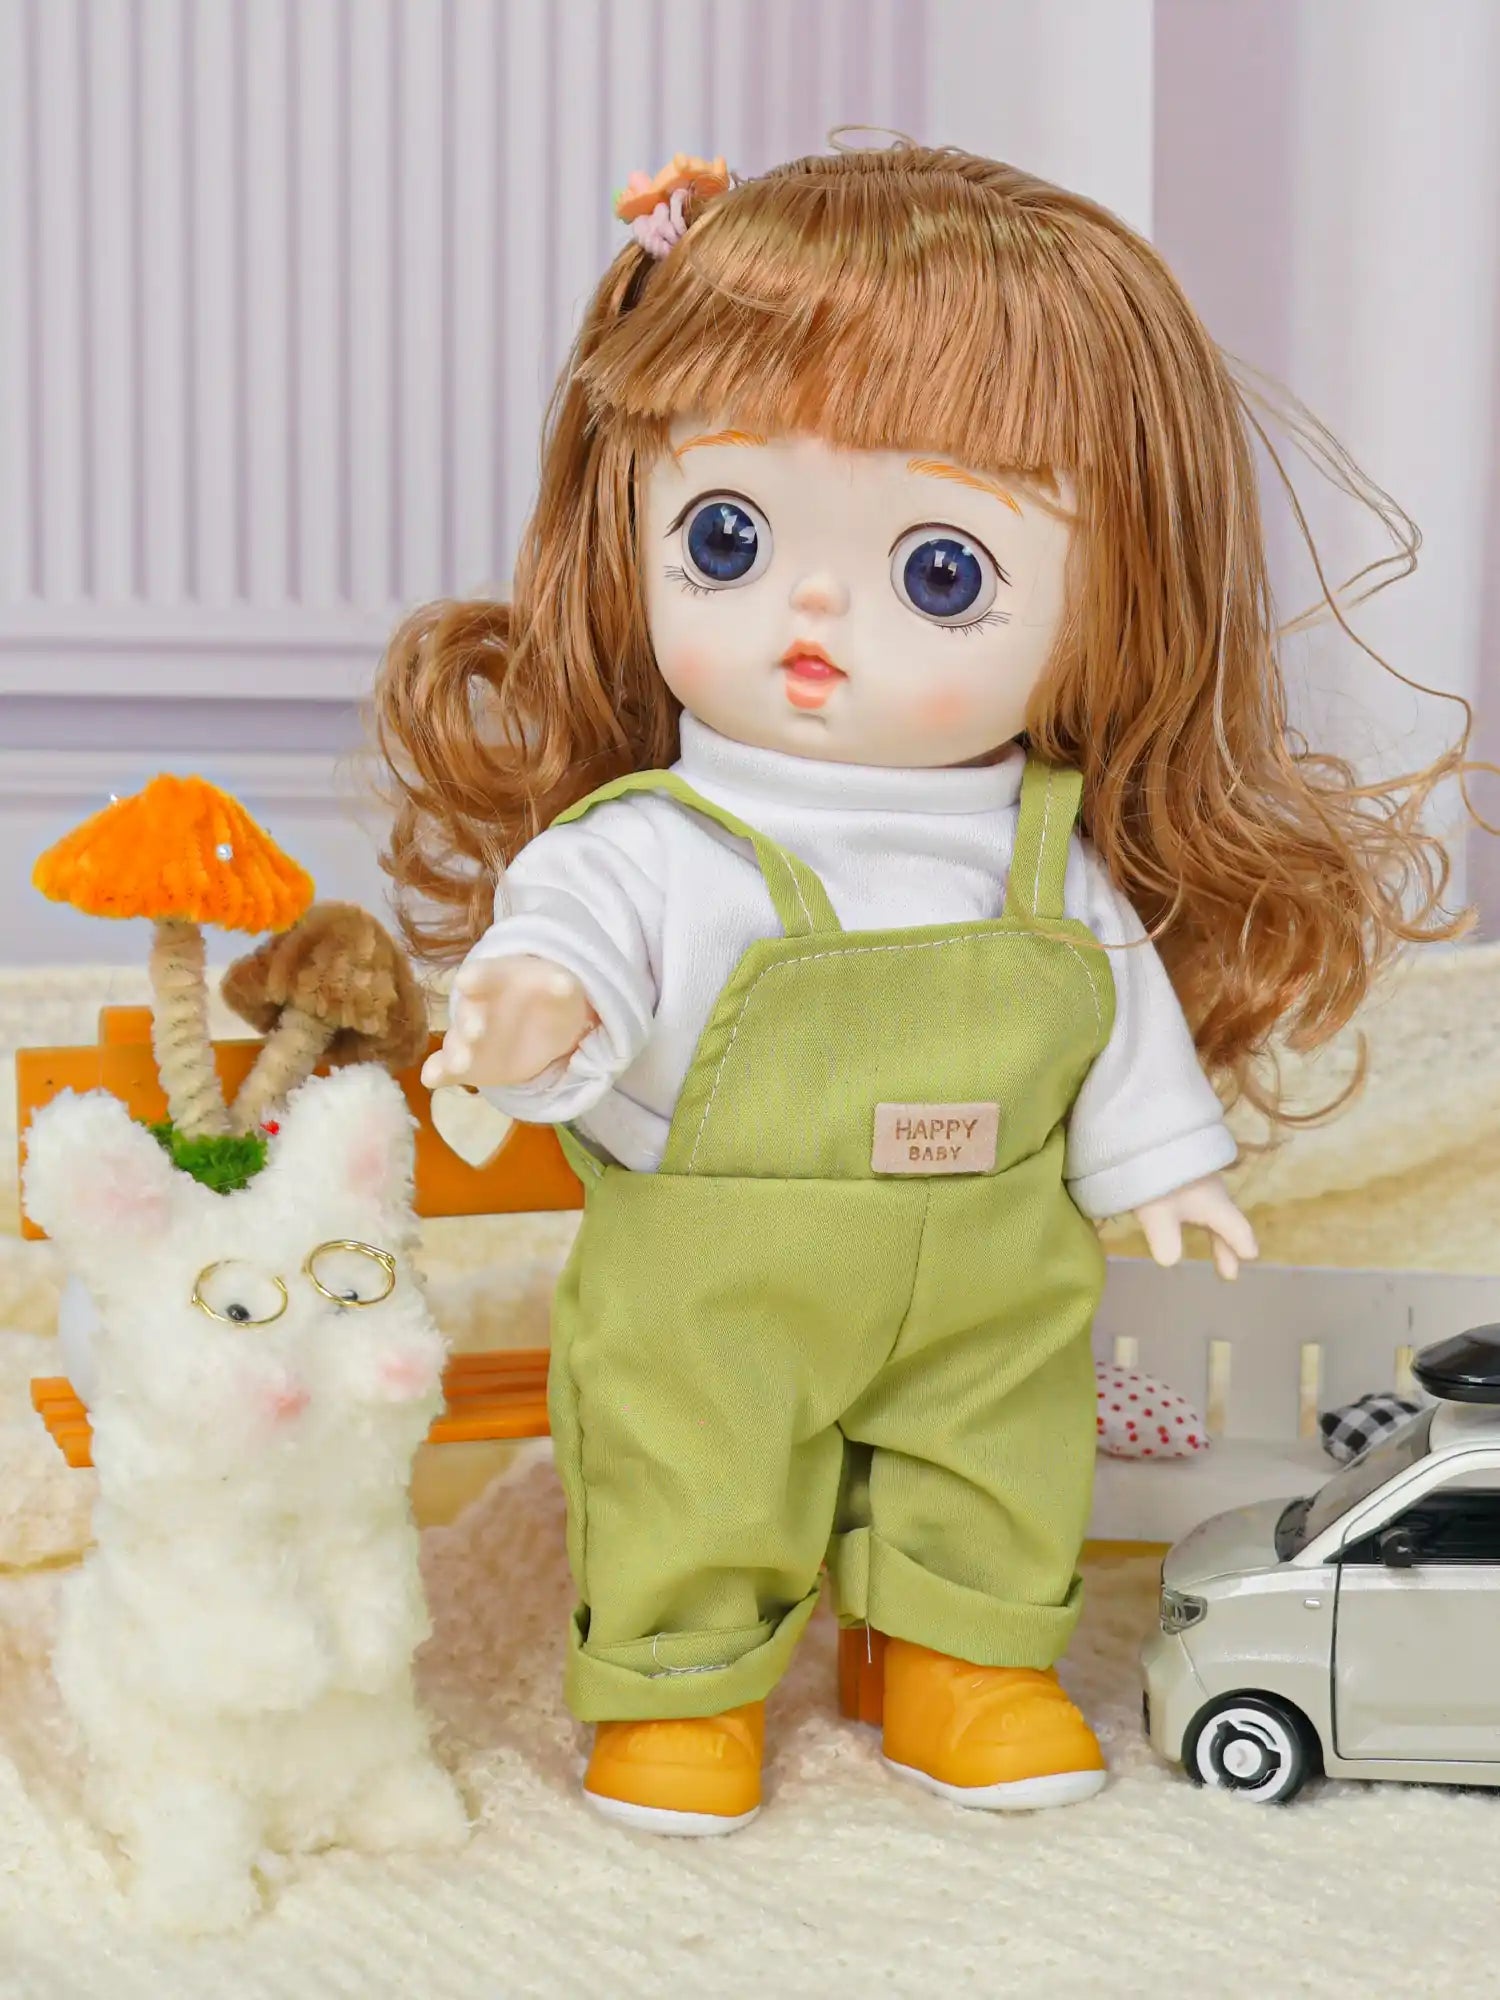 Doll with chestnut hair and blue eyes in a white shirt and green overalls, next to a fluffy toy cat.